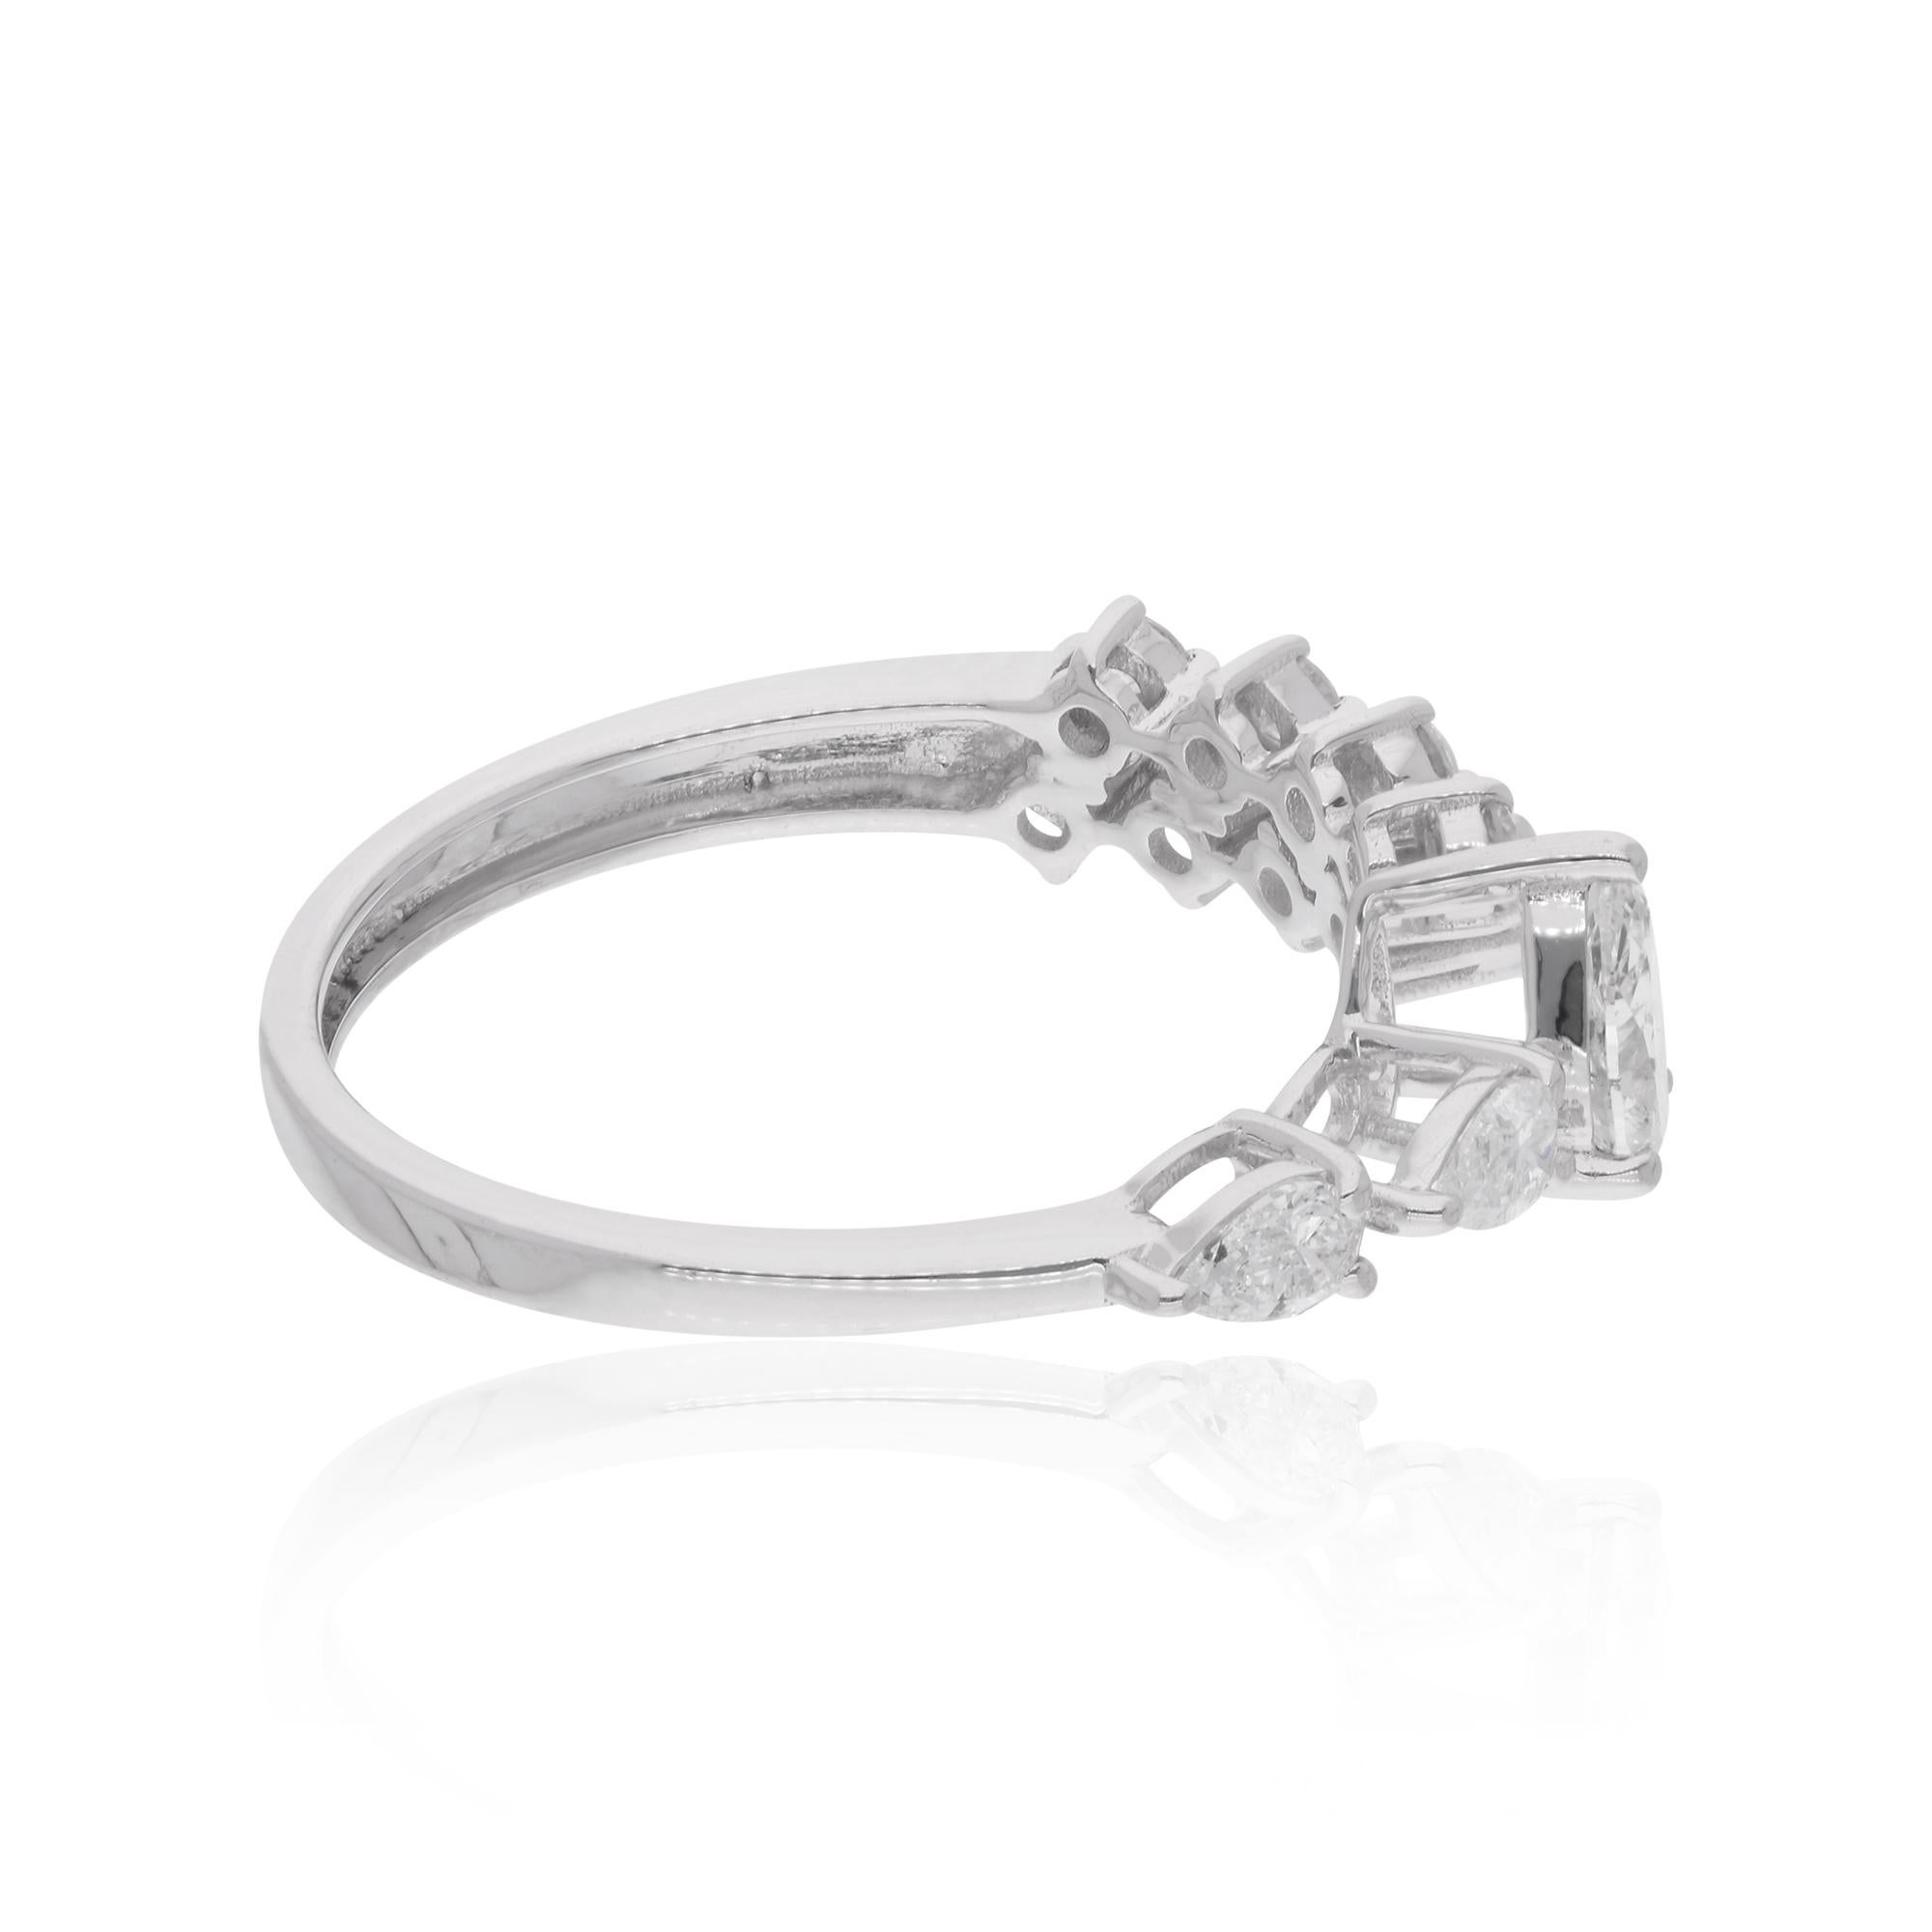 The 14 karat white gold setting enhances the brilliance of the diamonds, providing a radiant backdrop that accentuates their natural beauty. The cuff design adds a contemporary twist to the traditional ring silhouette, offering a comfortable and